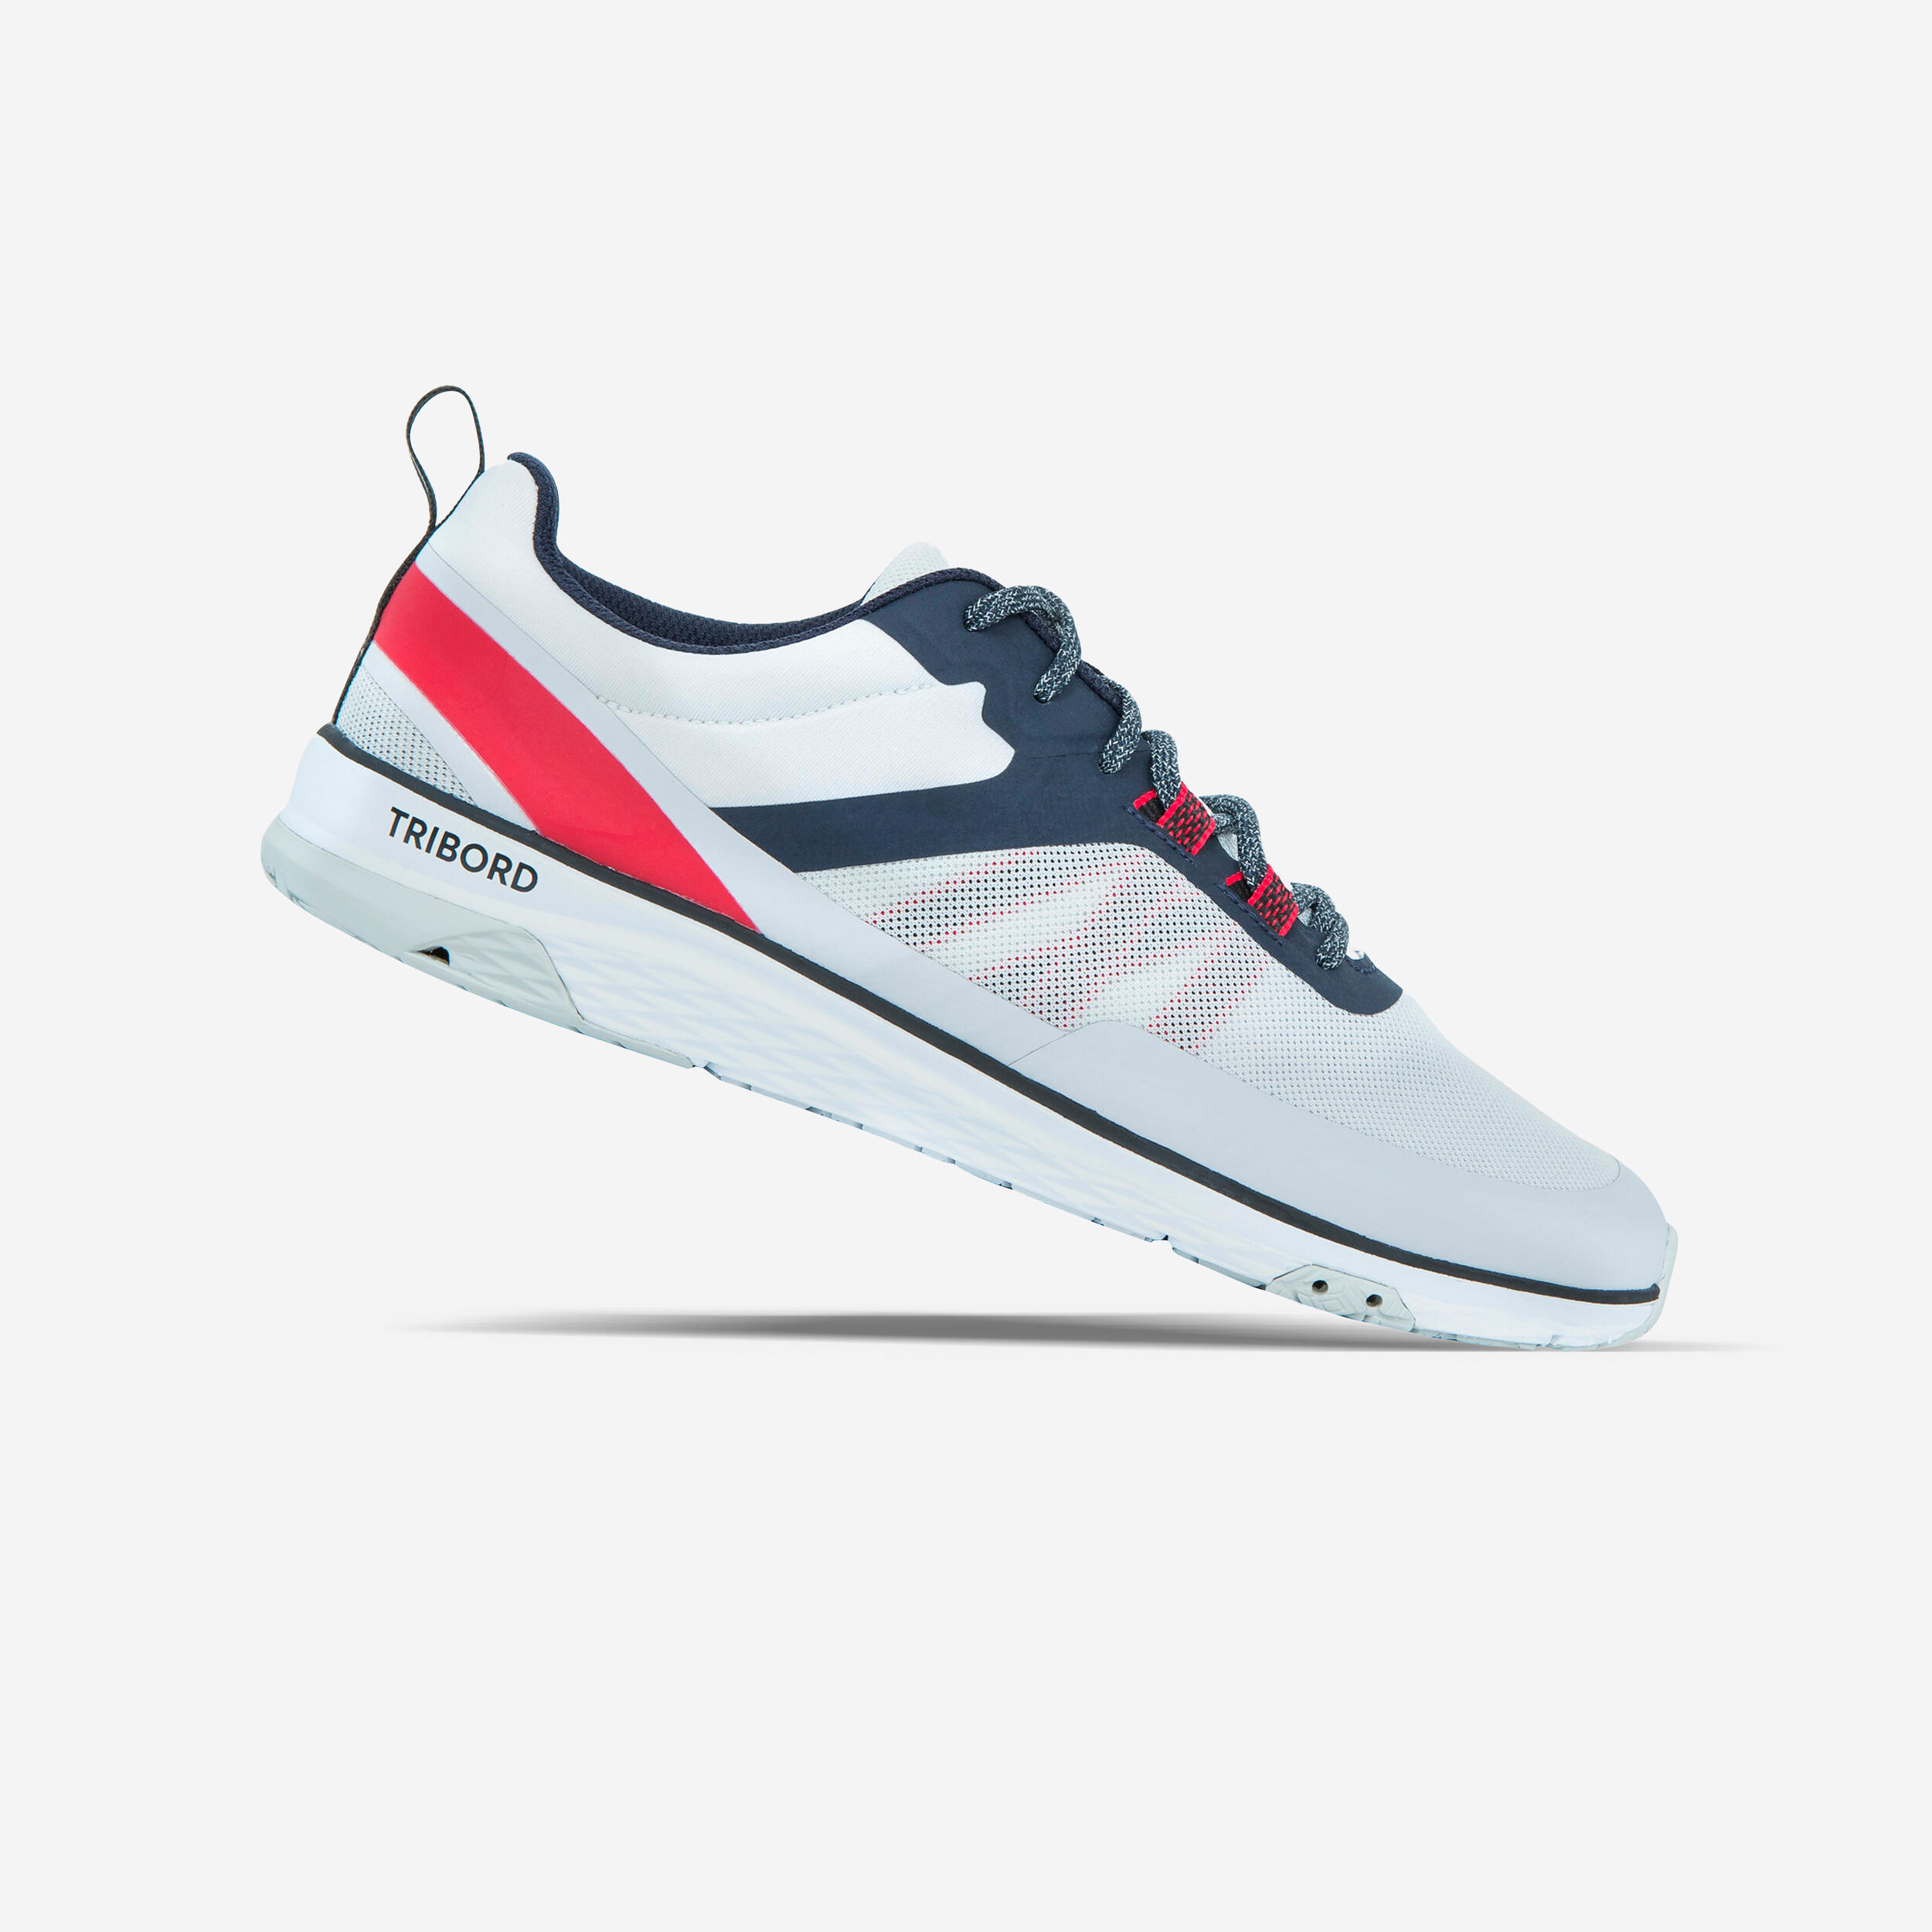 TRIBORD Men’s Sailing Boat Trainers Race - Light Grey / Blue / Red